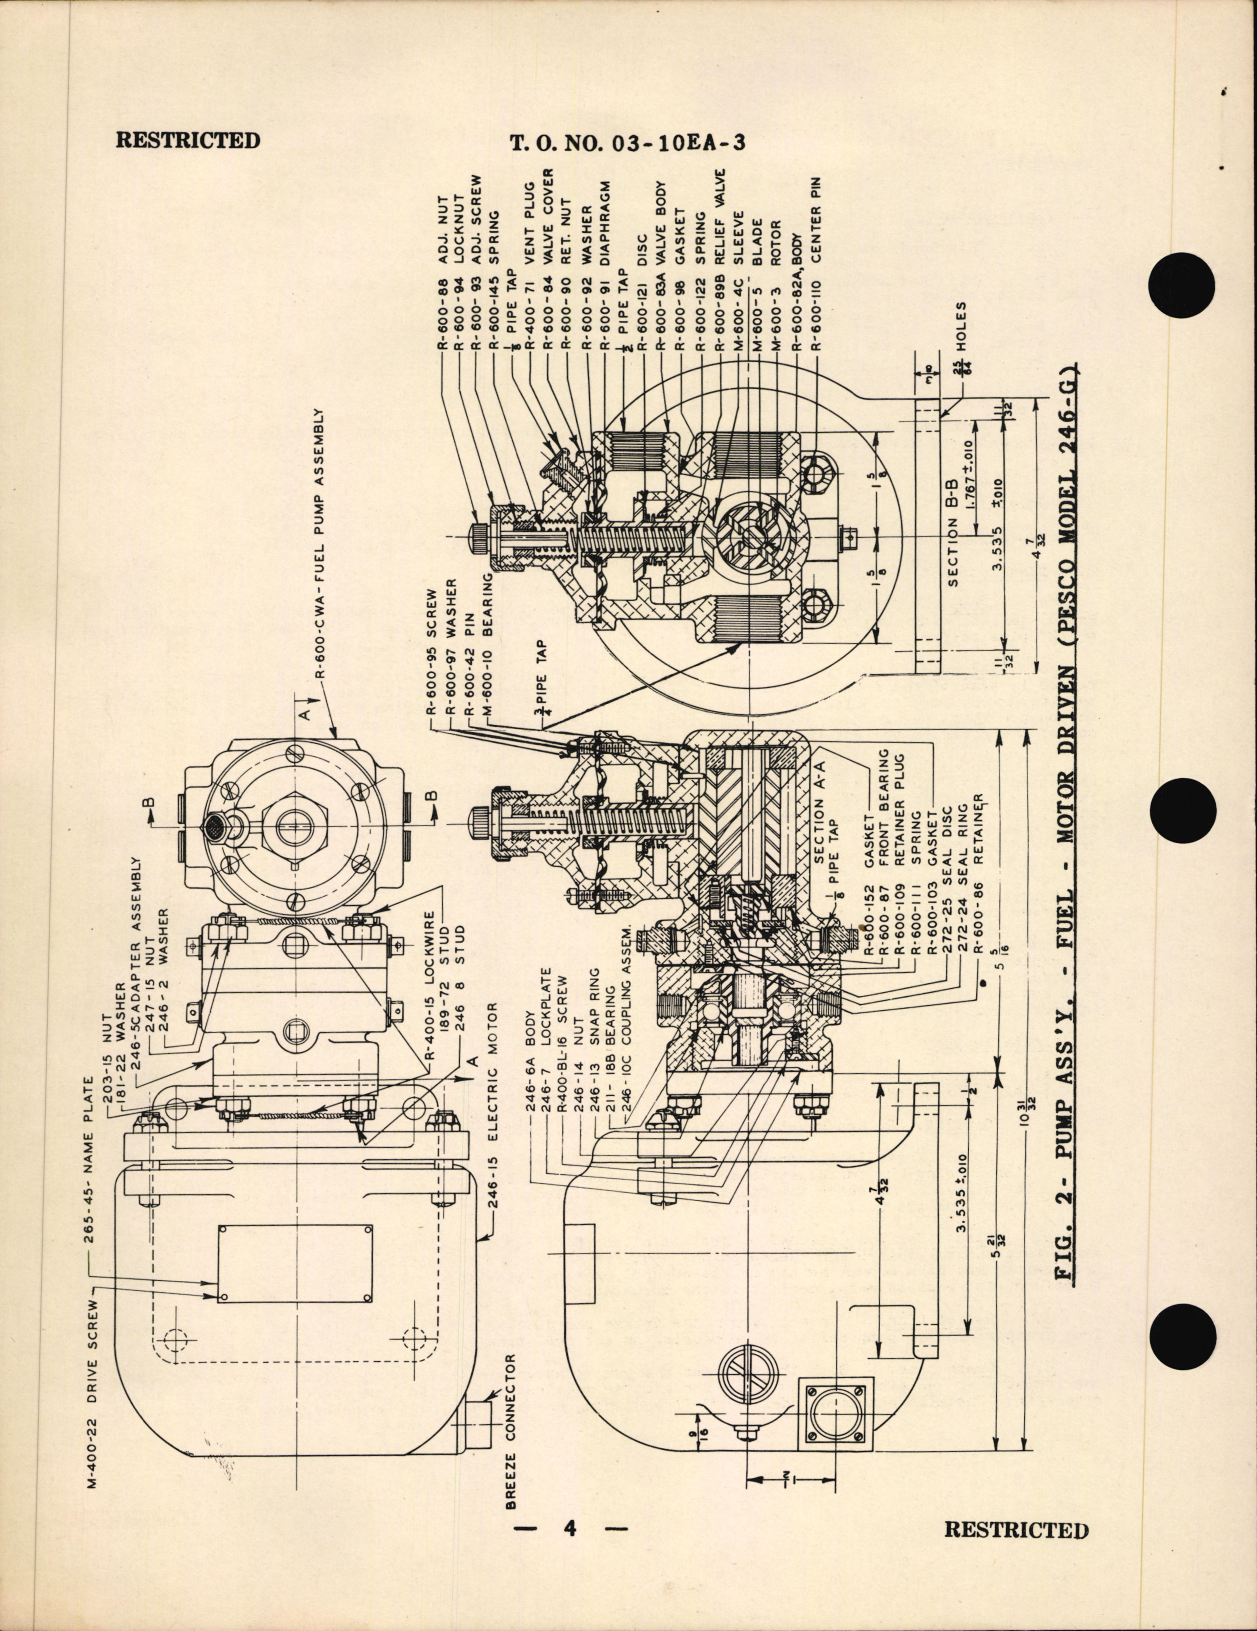 Sample page 6 from AirCorps Library document: Handbook of Instructions with Assembly Parts List for Electric Motor Driven Fuel Pump